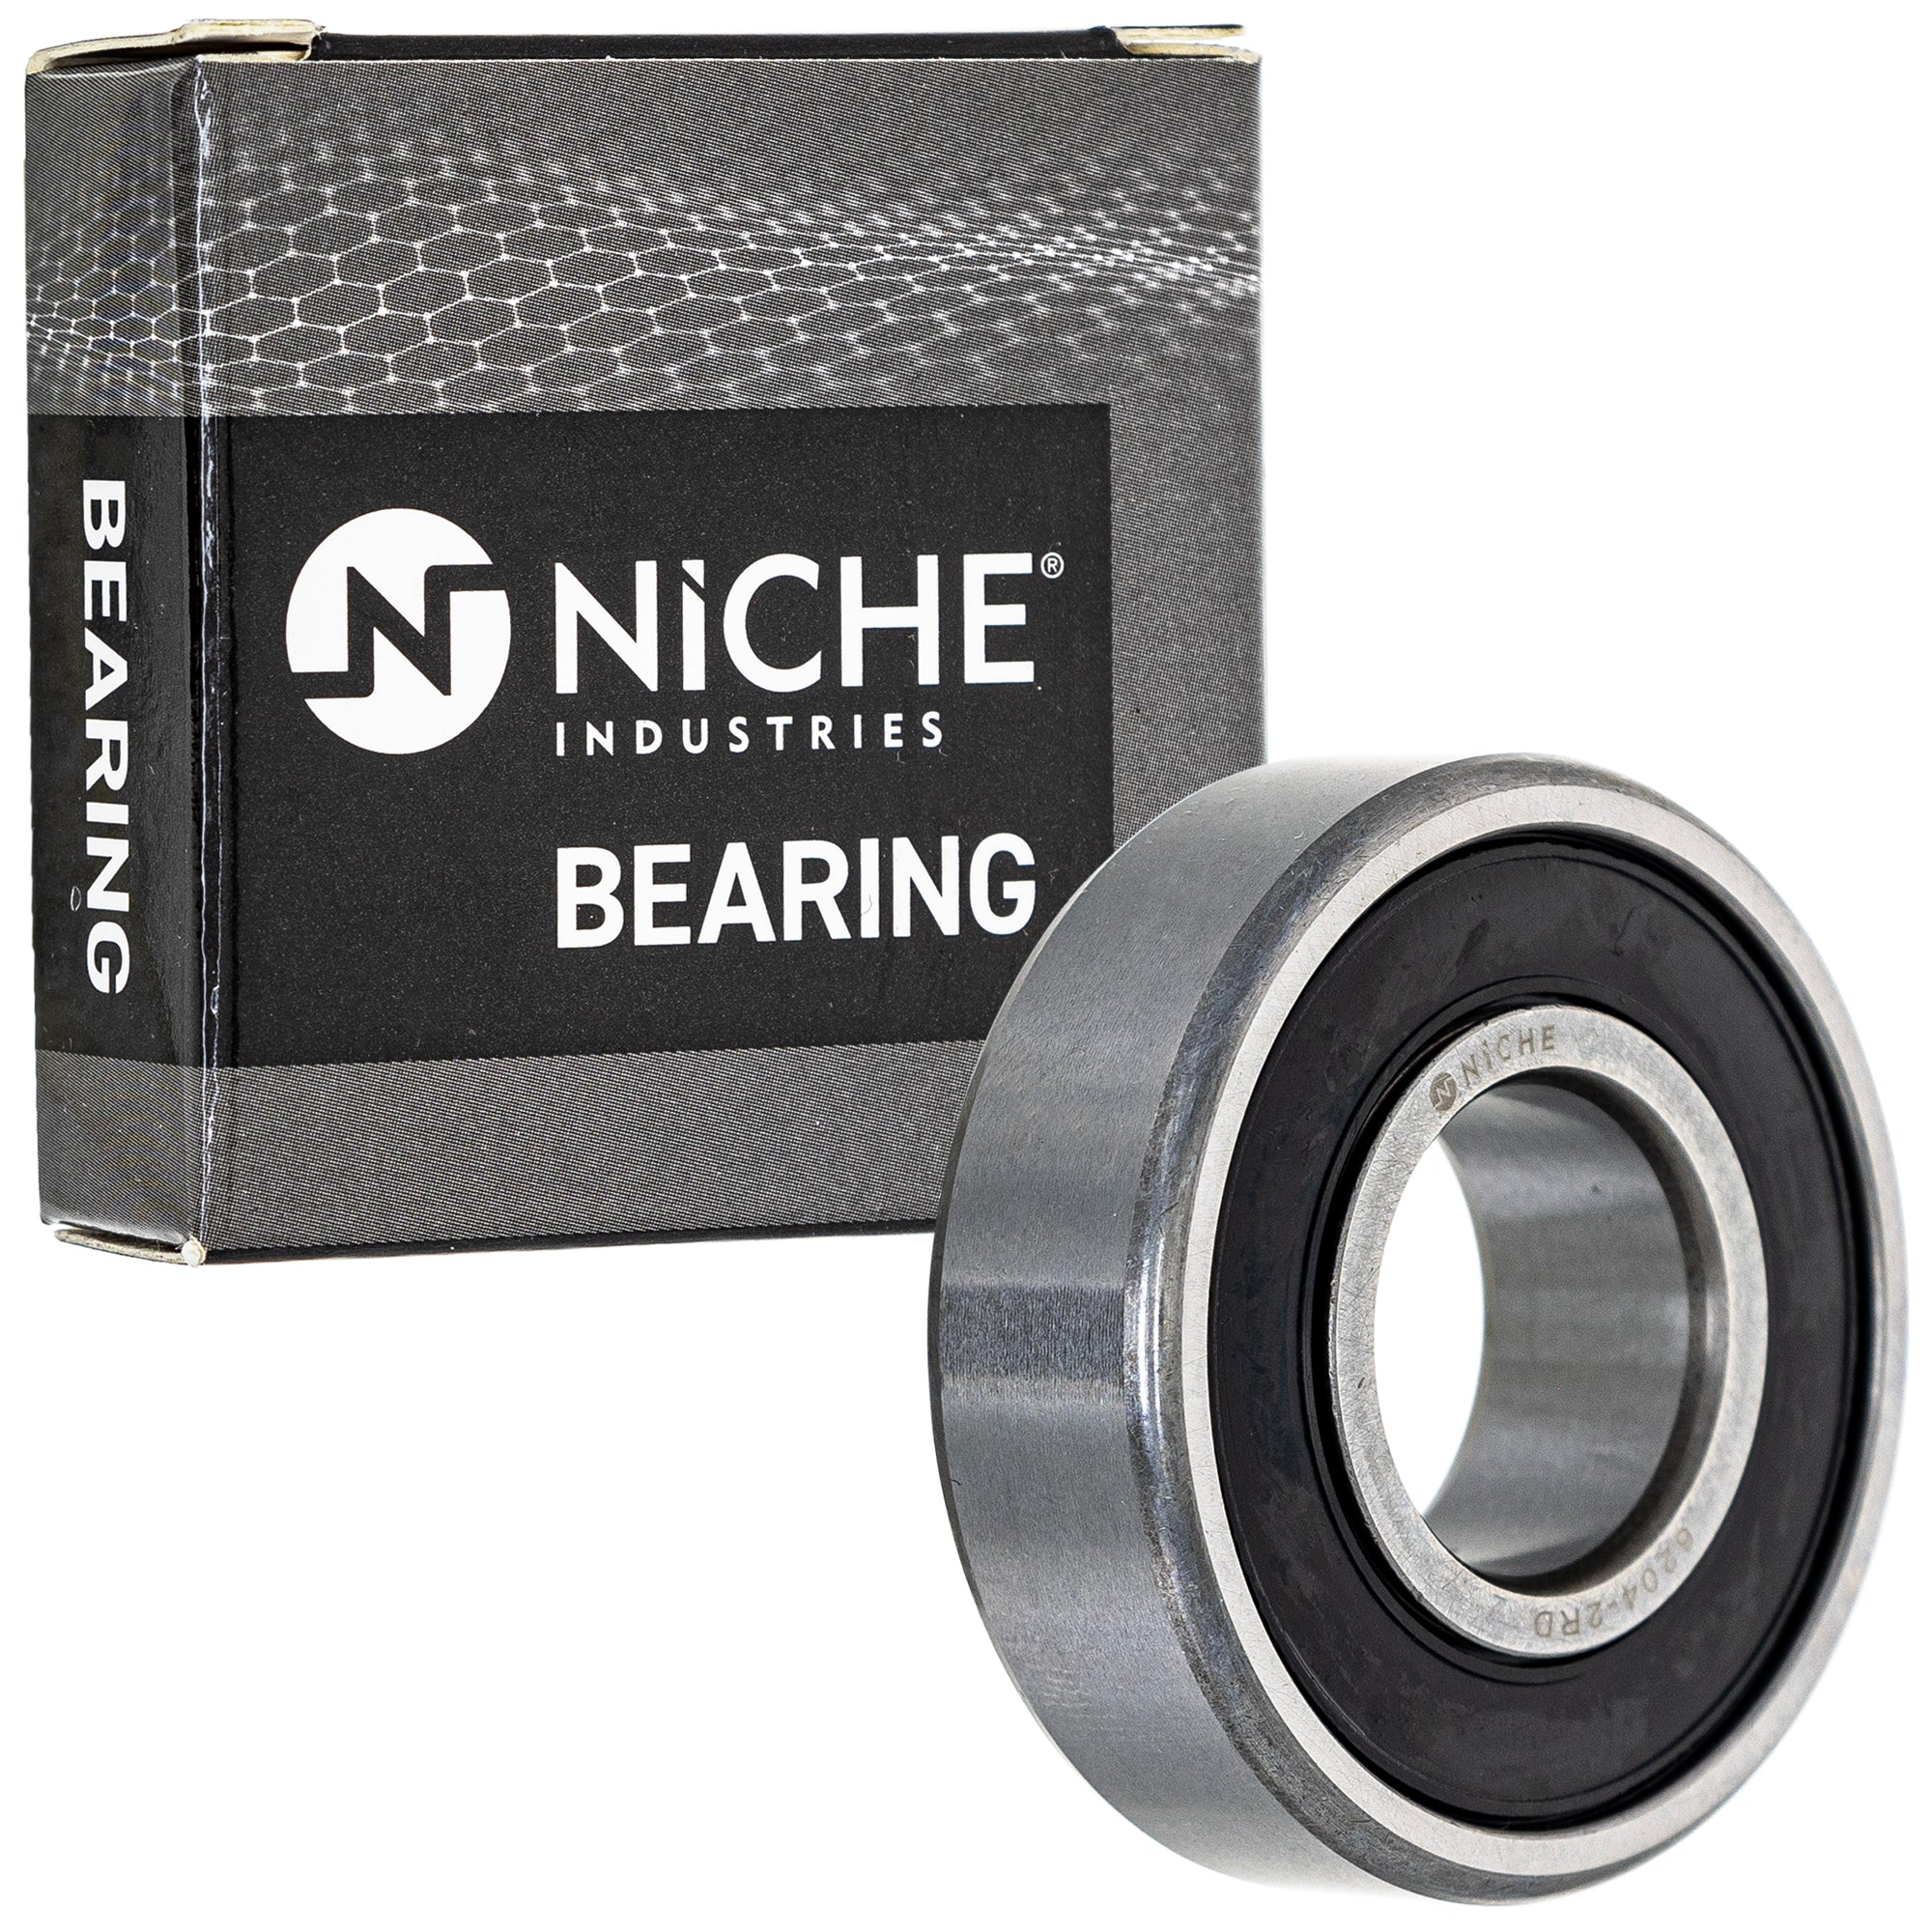 NICHE 519-CBB2212R Bearing & Seal Kit 2-Pack for zOTHER Snapper